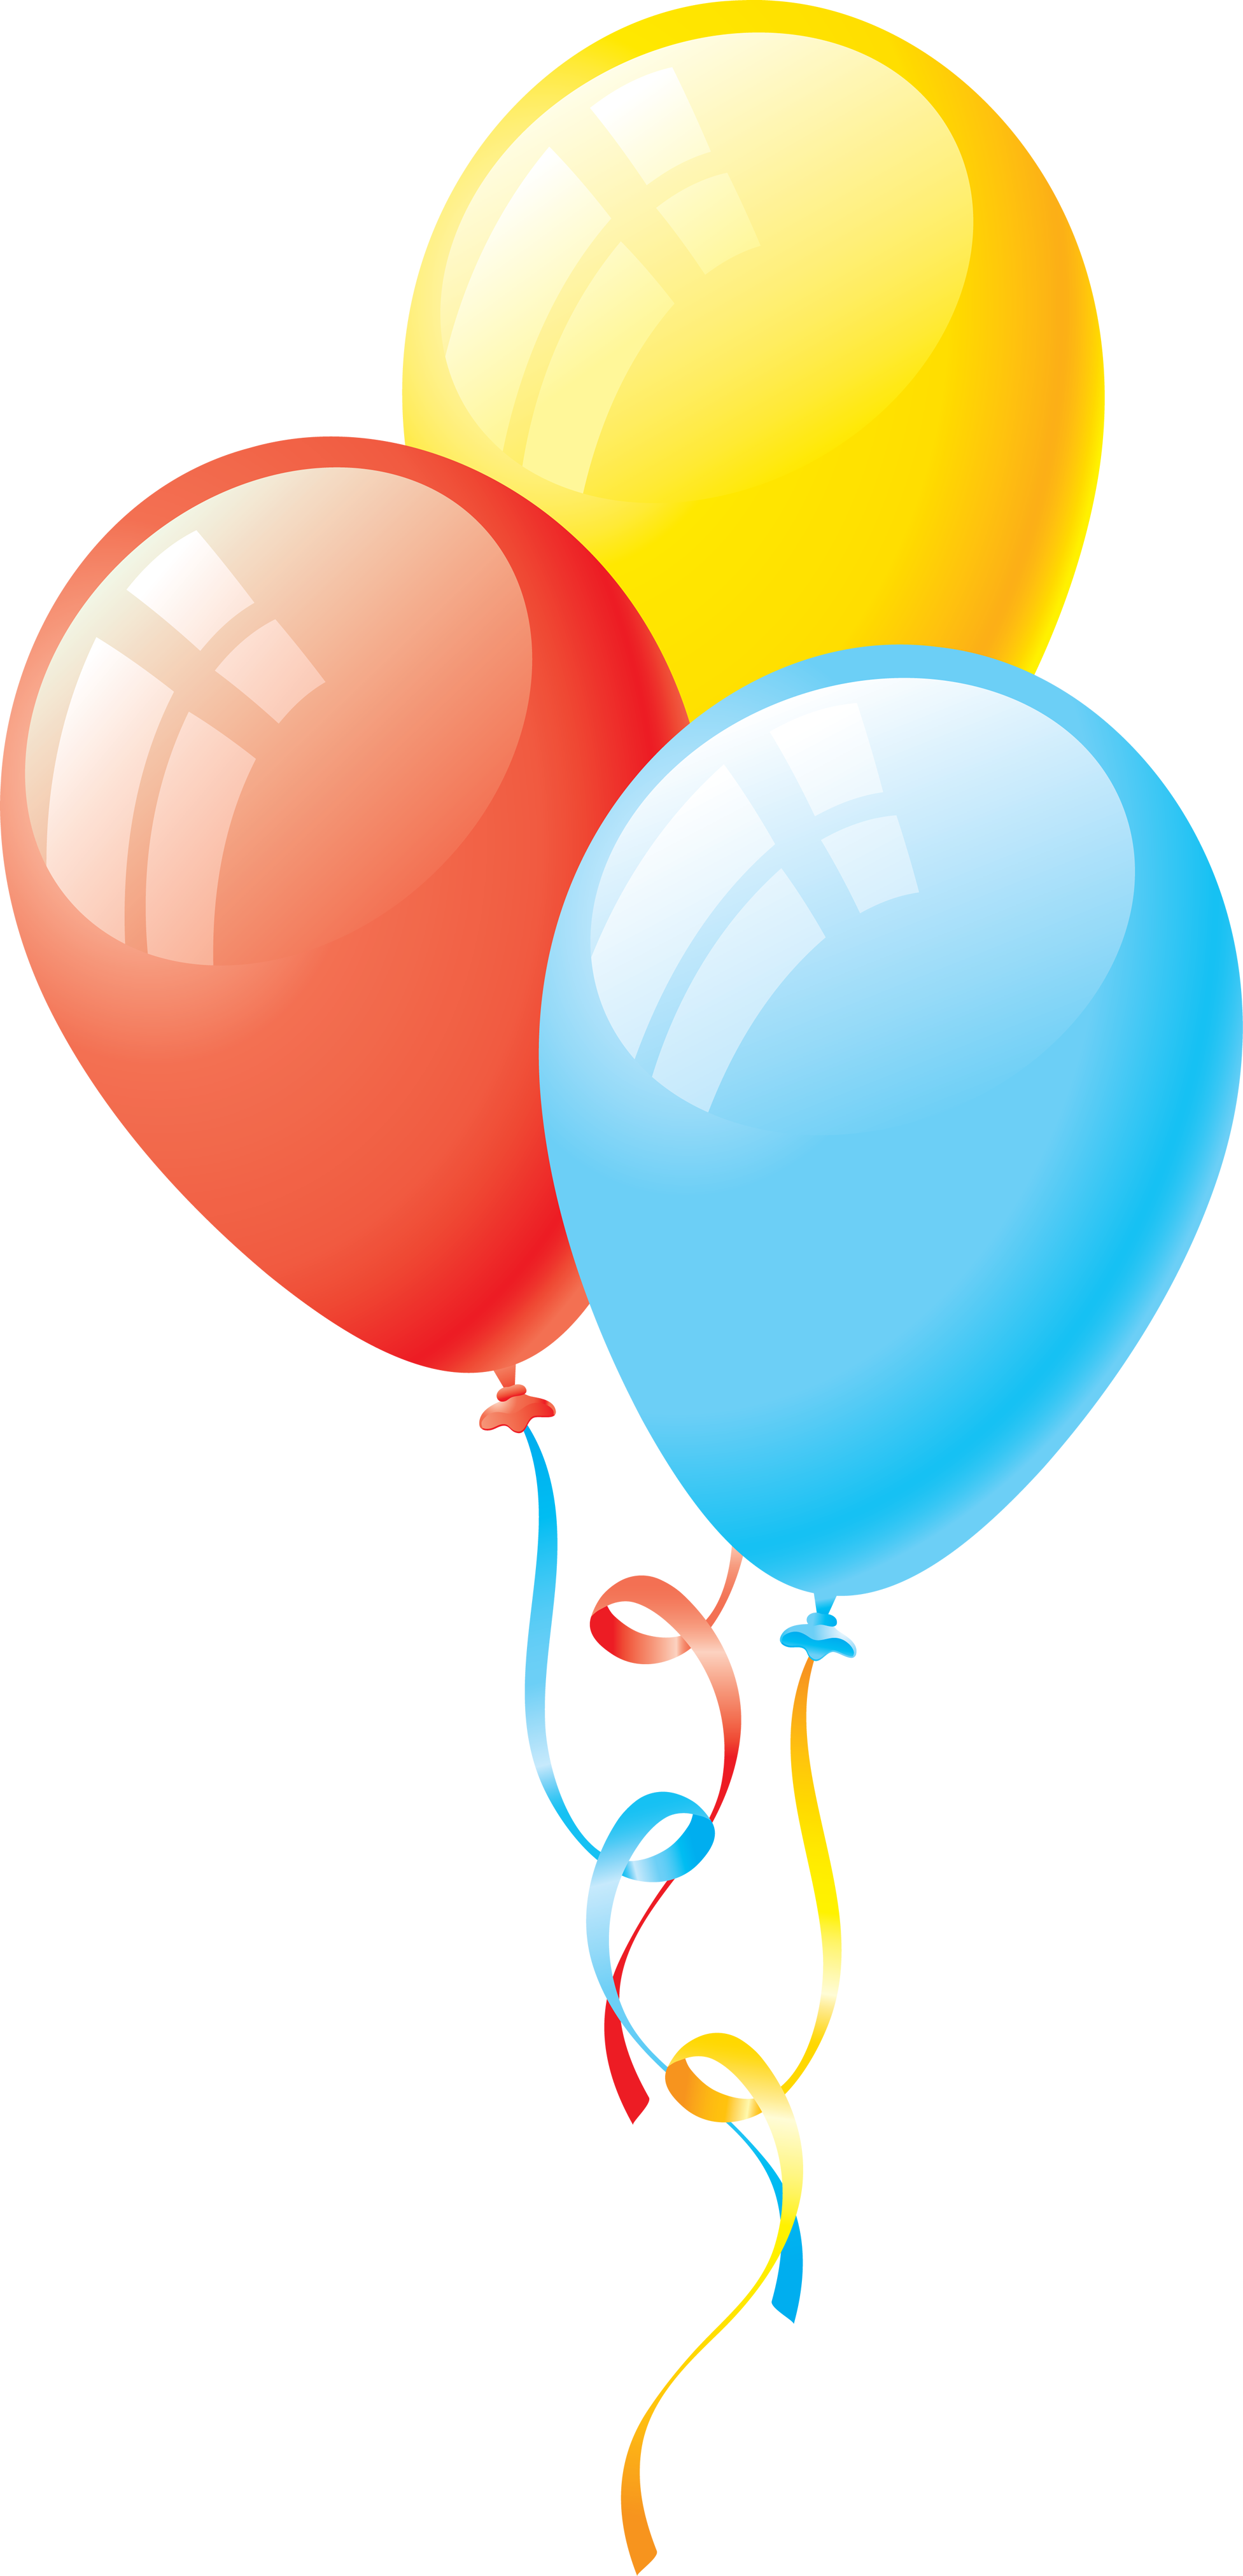 Balloon Balloons Download Free Image Clipart